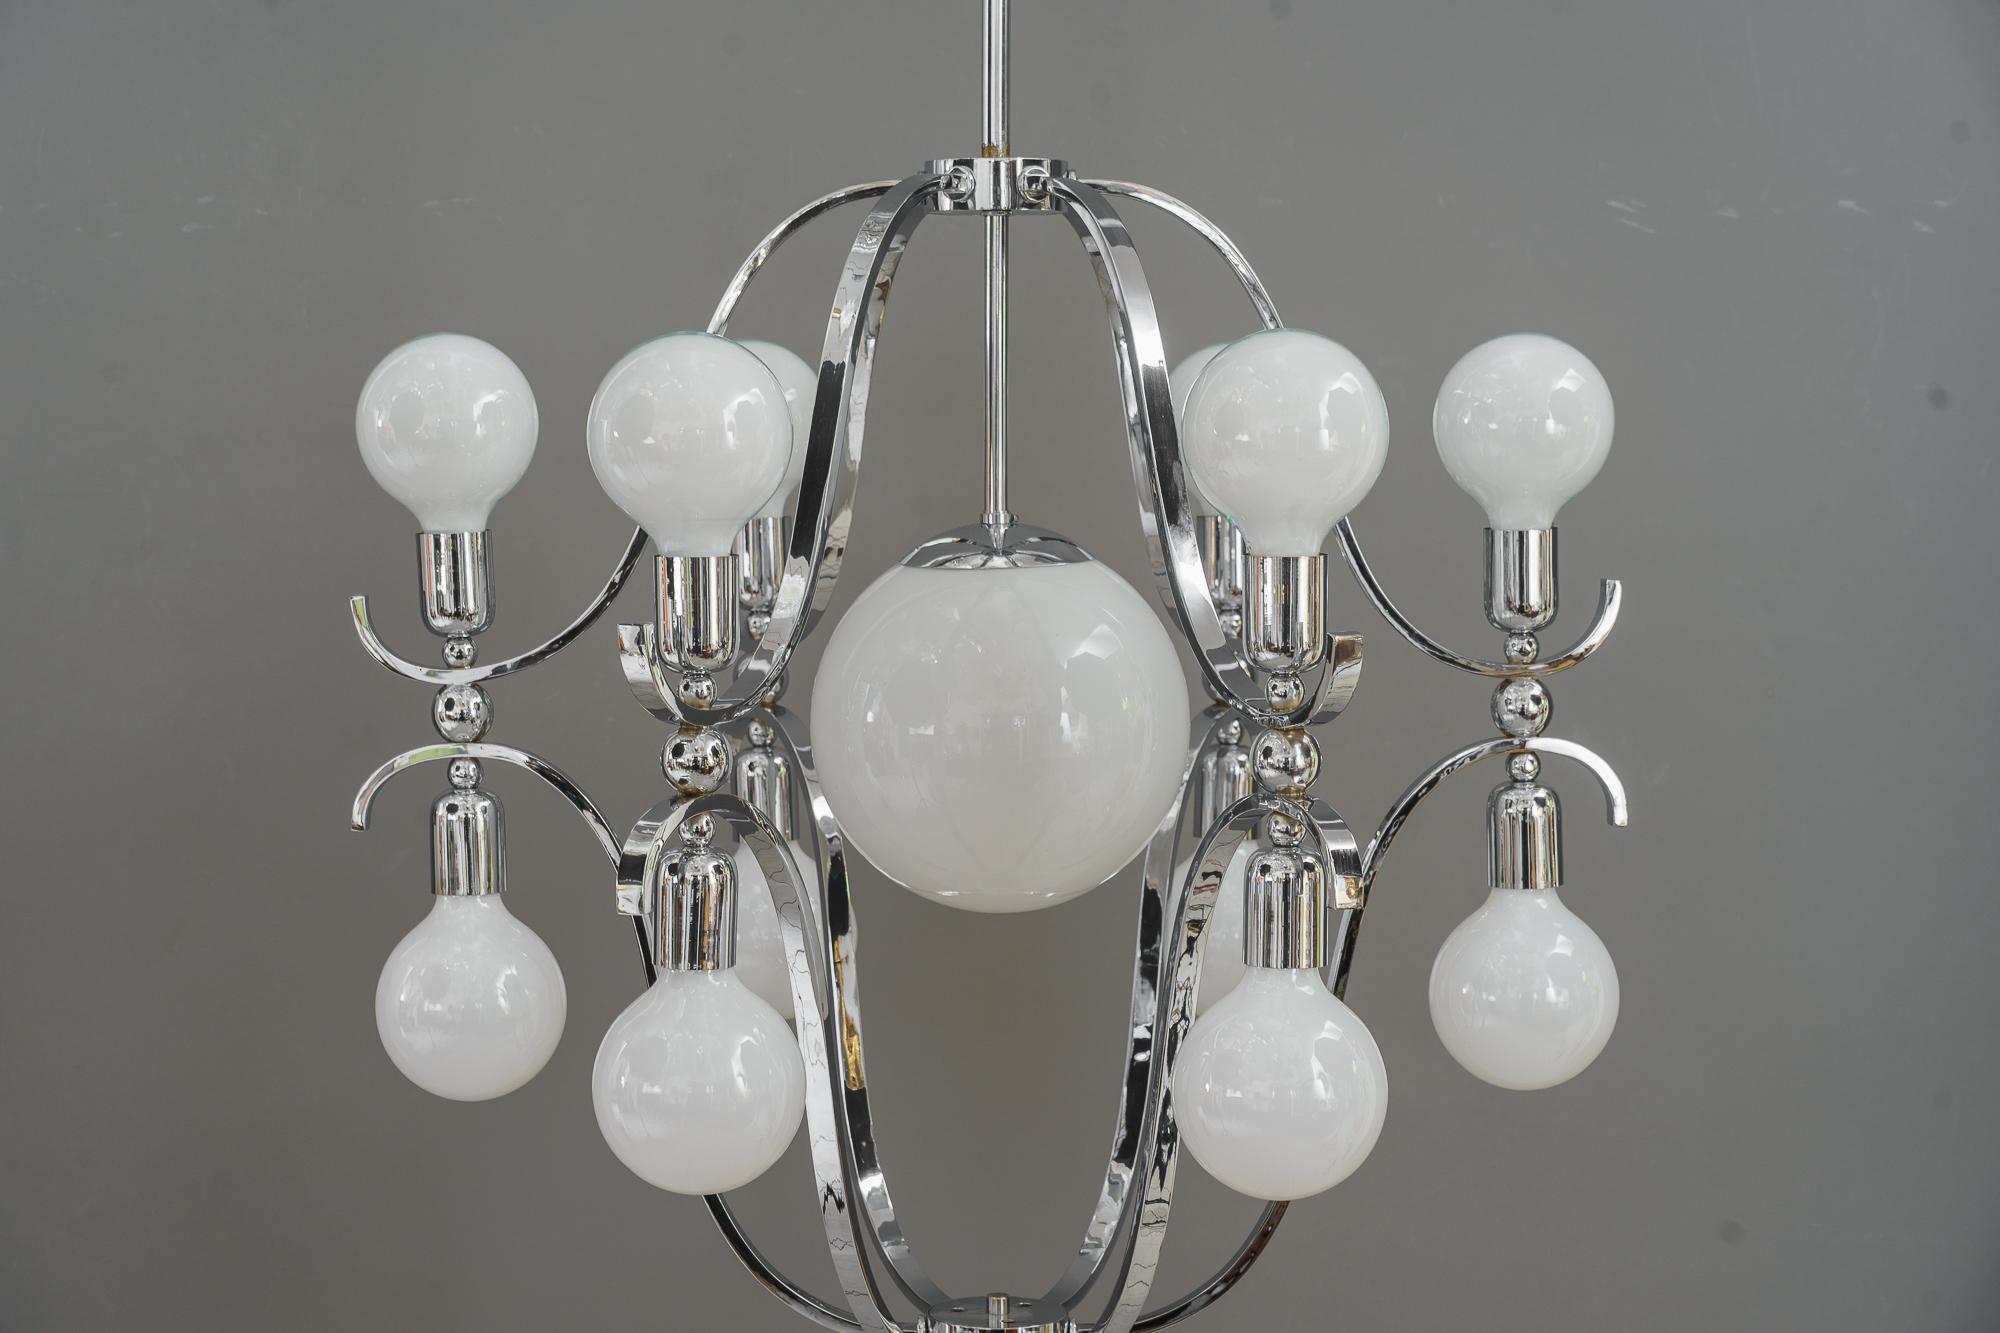 Rare and very big chrome chandelier vienna around 1920s
Lower part without the stem is 90cm
Good original condition
we have different bulb sizes. ( you can choose )
Only the middle one is a glass shade, the other ones are big bulbs.